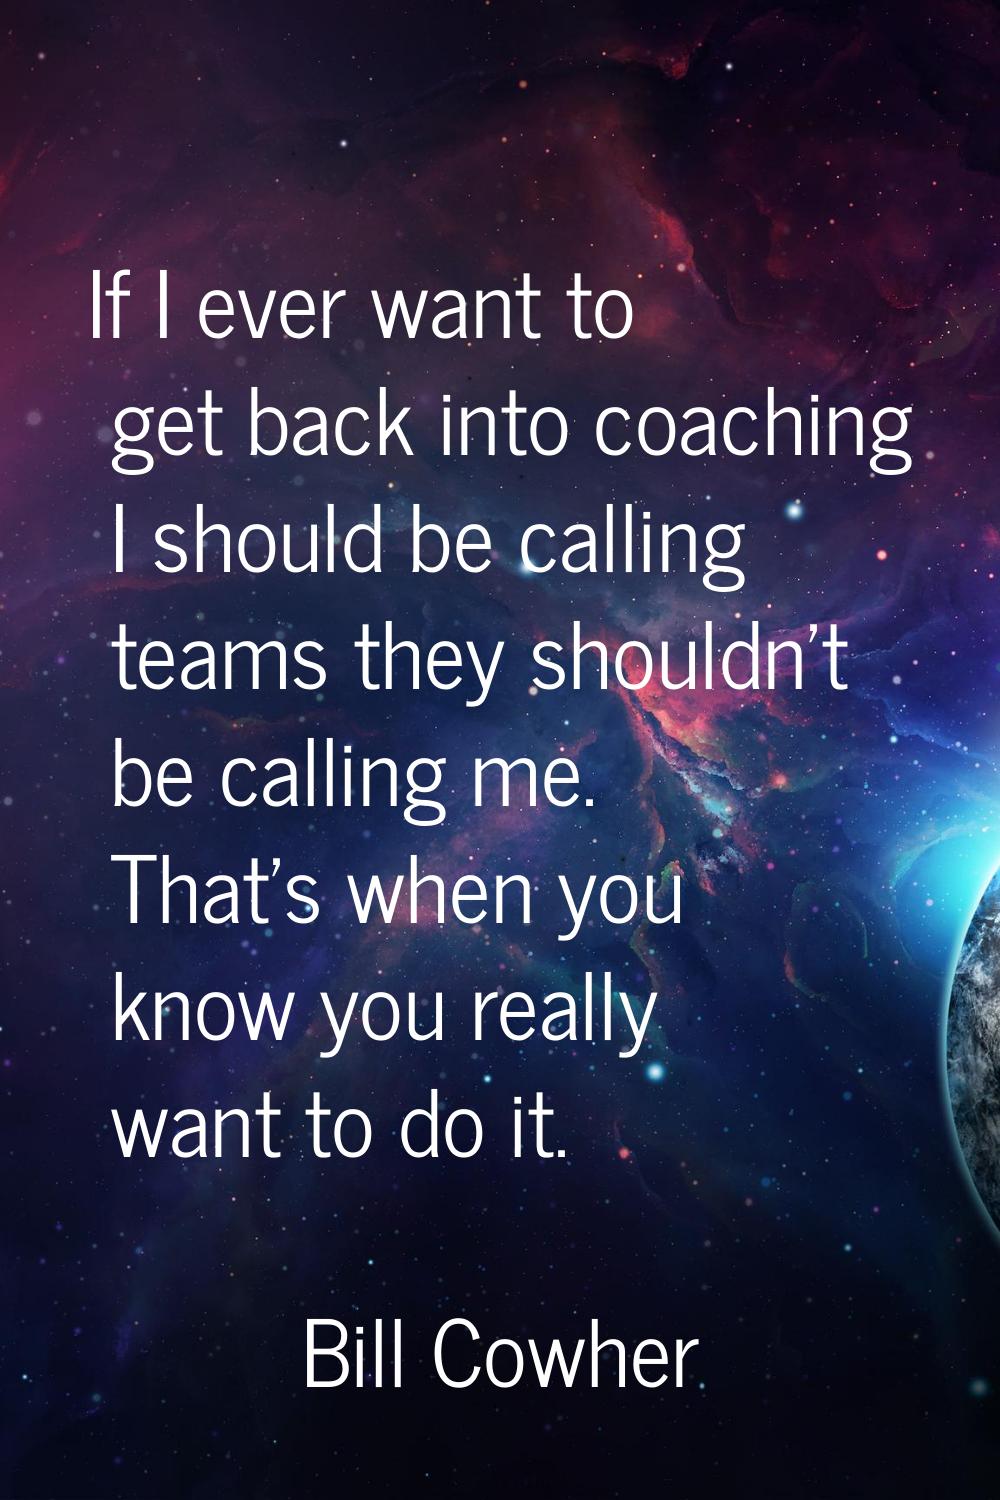 If I ever want to get back into coaching I should be calling teams they shouldn't be calling me. Th